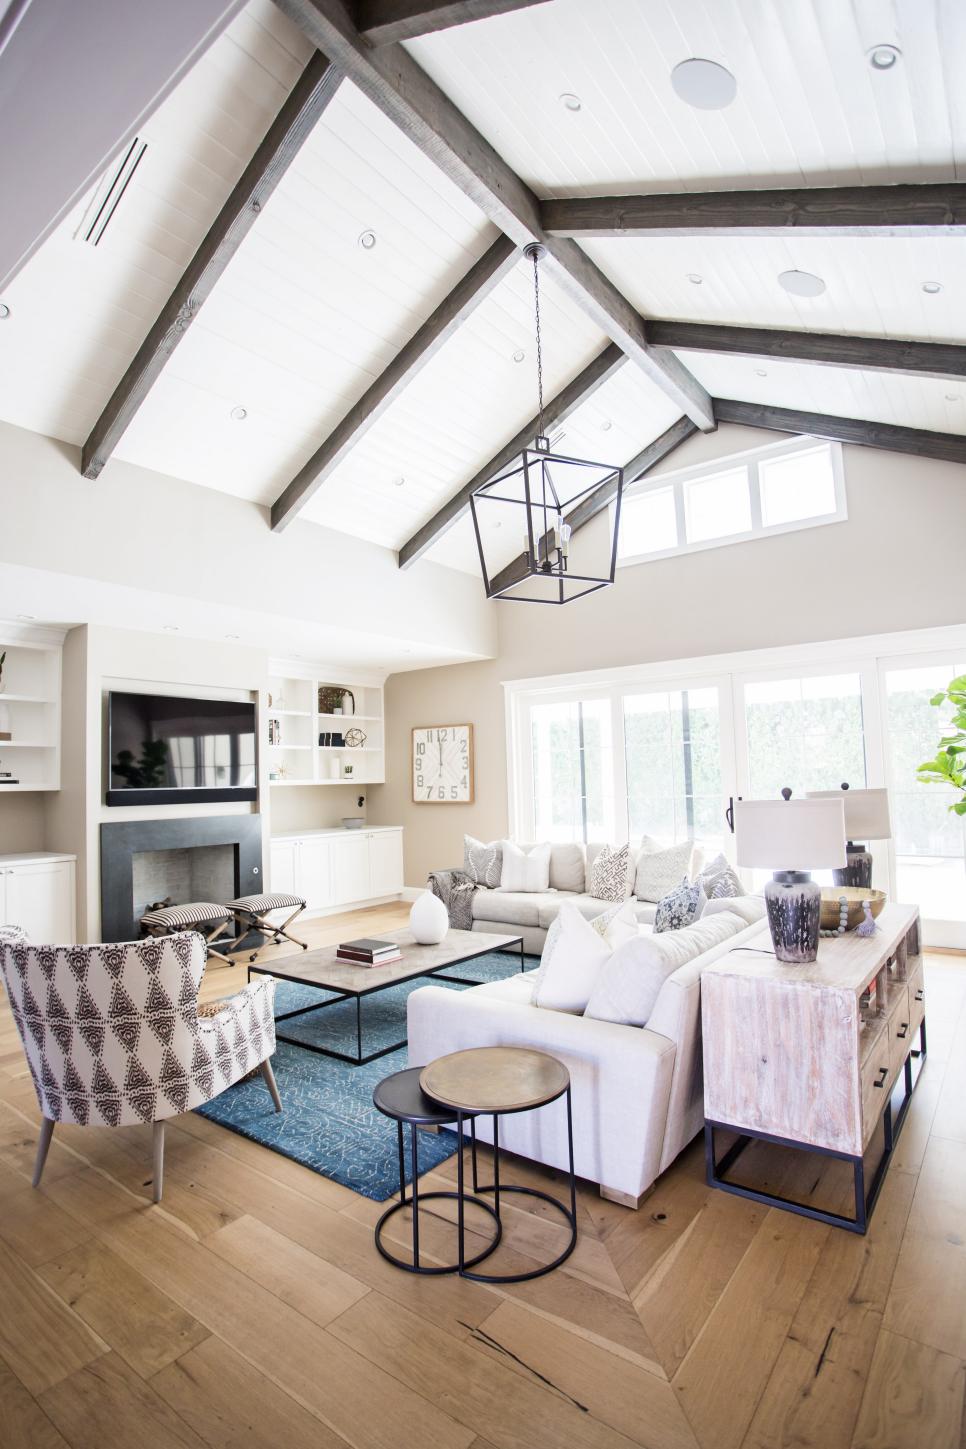 Transitional Living Room Boasts Vaulted Ceilings With Wood Beams | HGTV